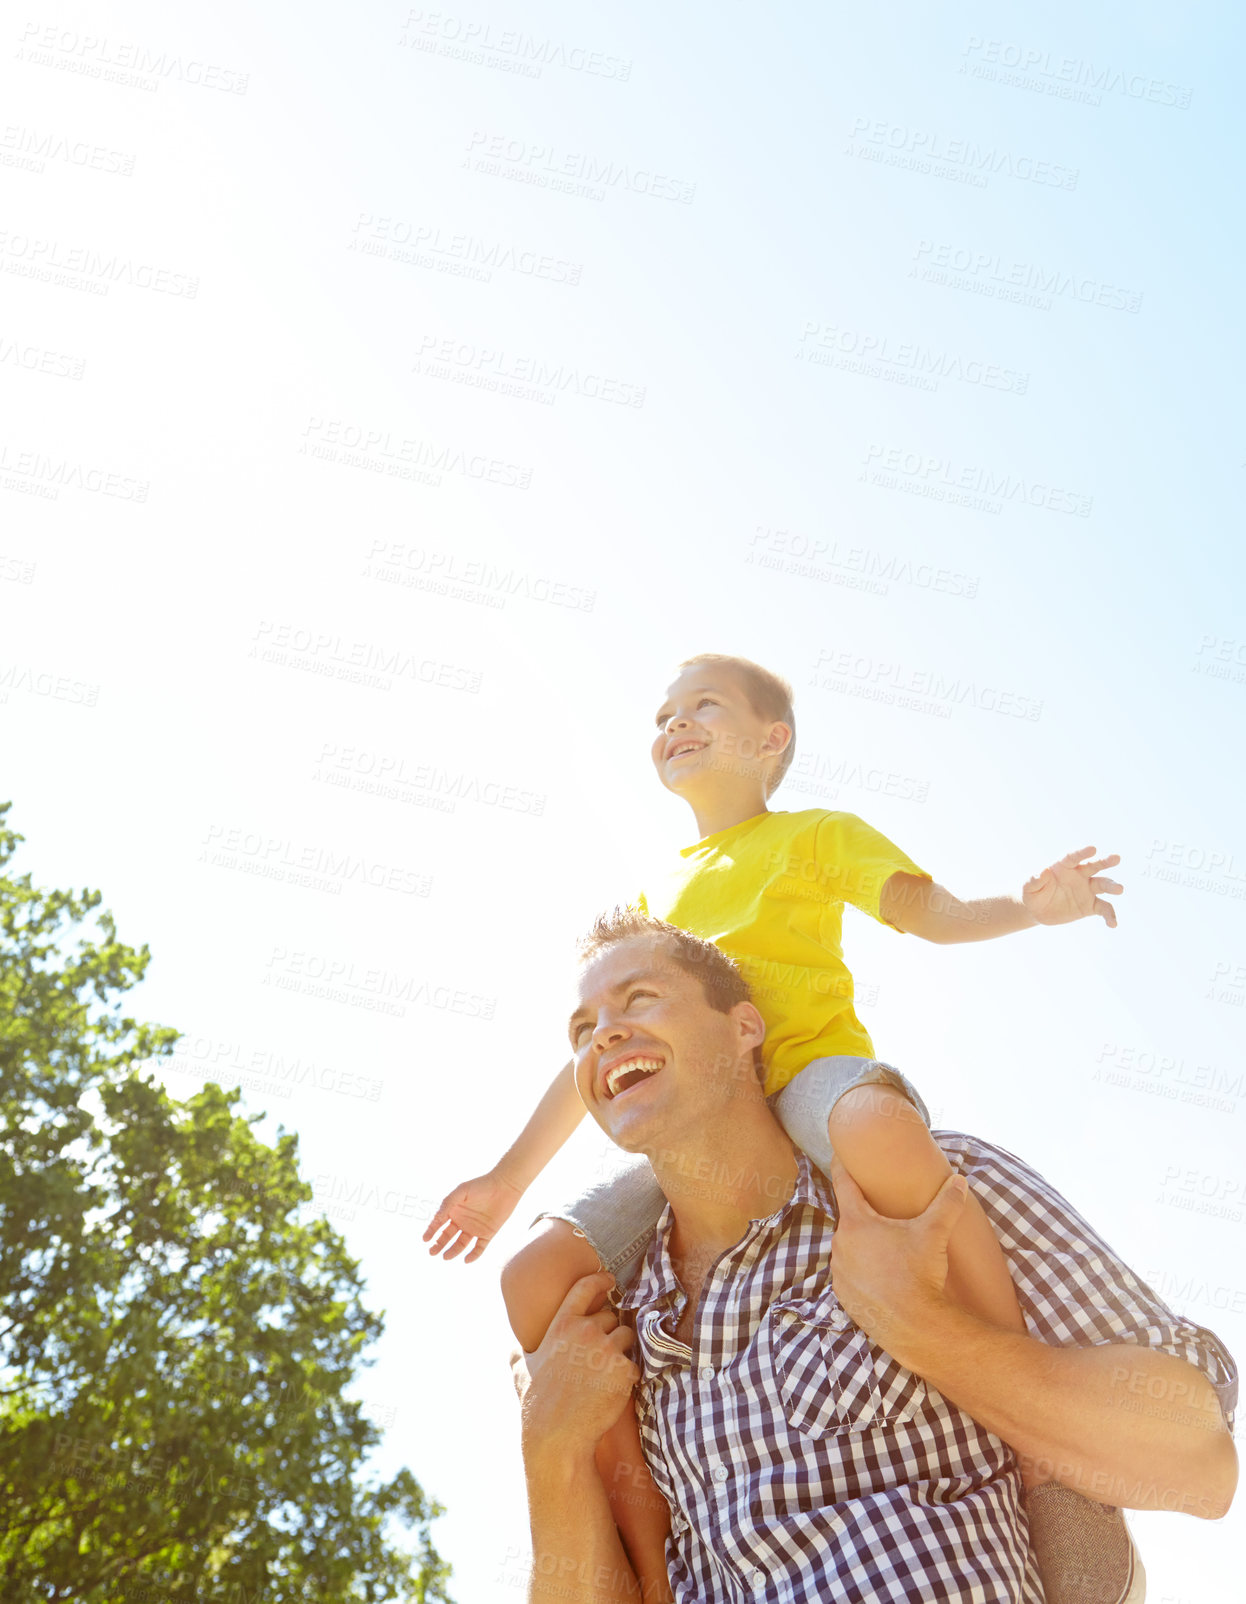 Buy stock photo Cute young boy being carried on his father's shoulders and smiling widely